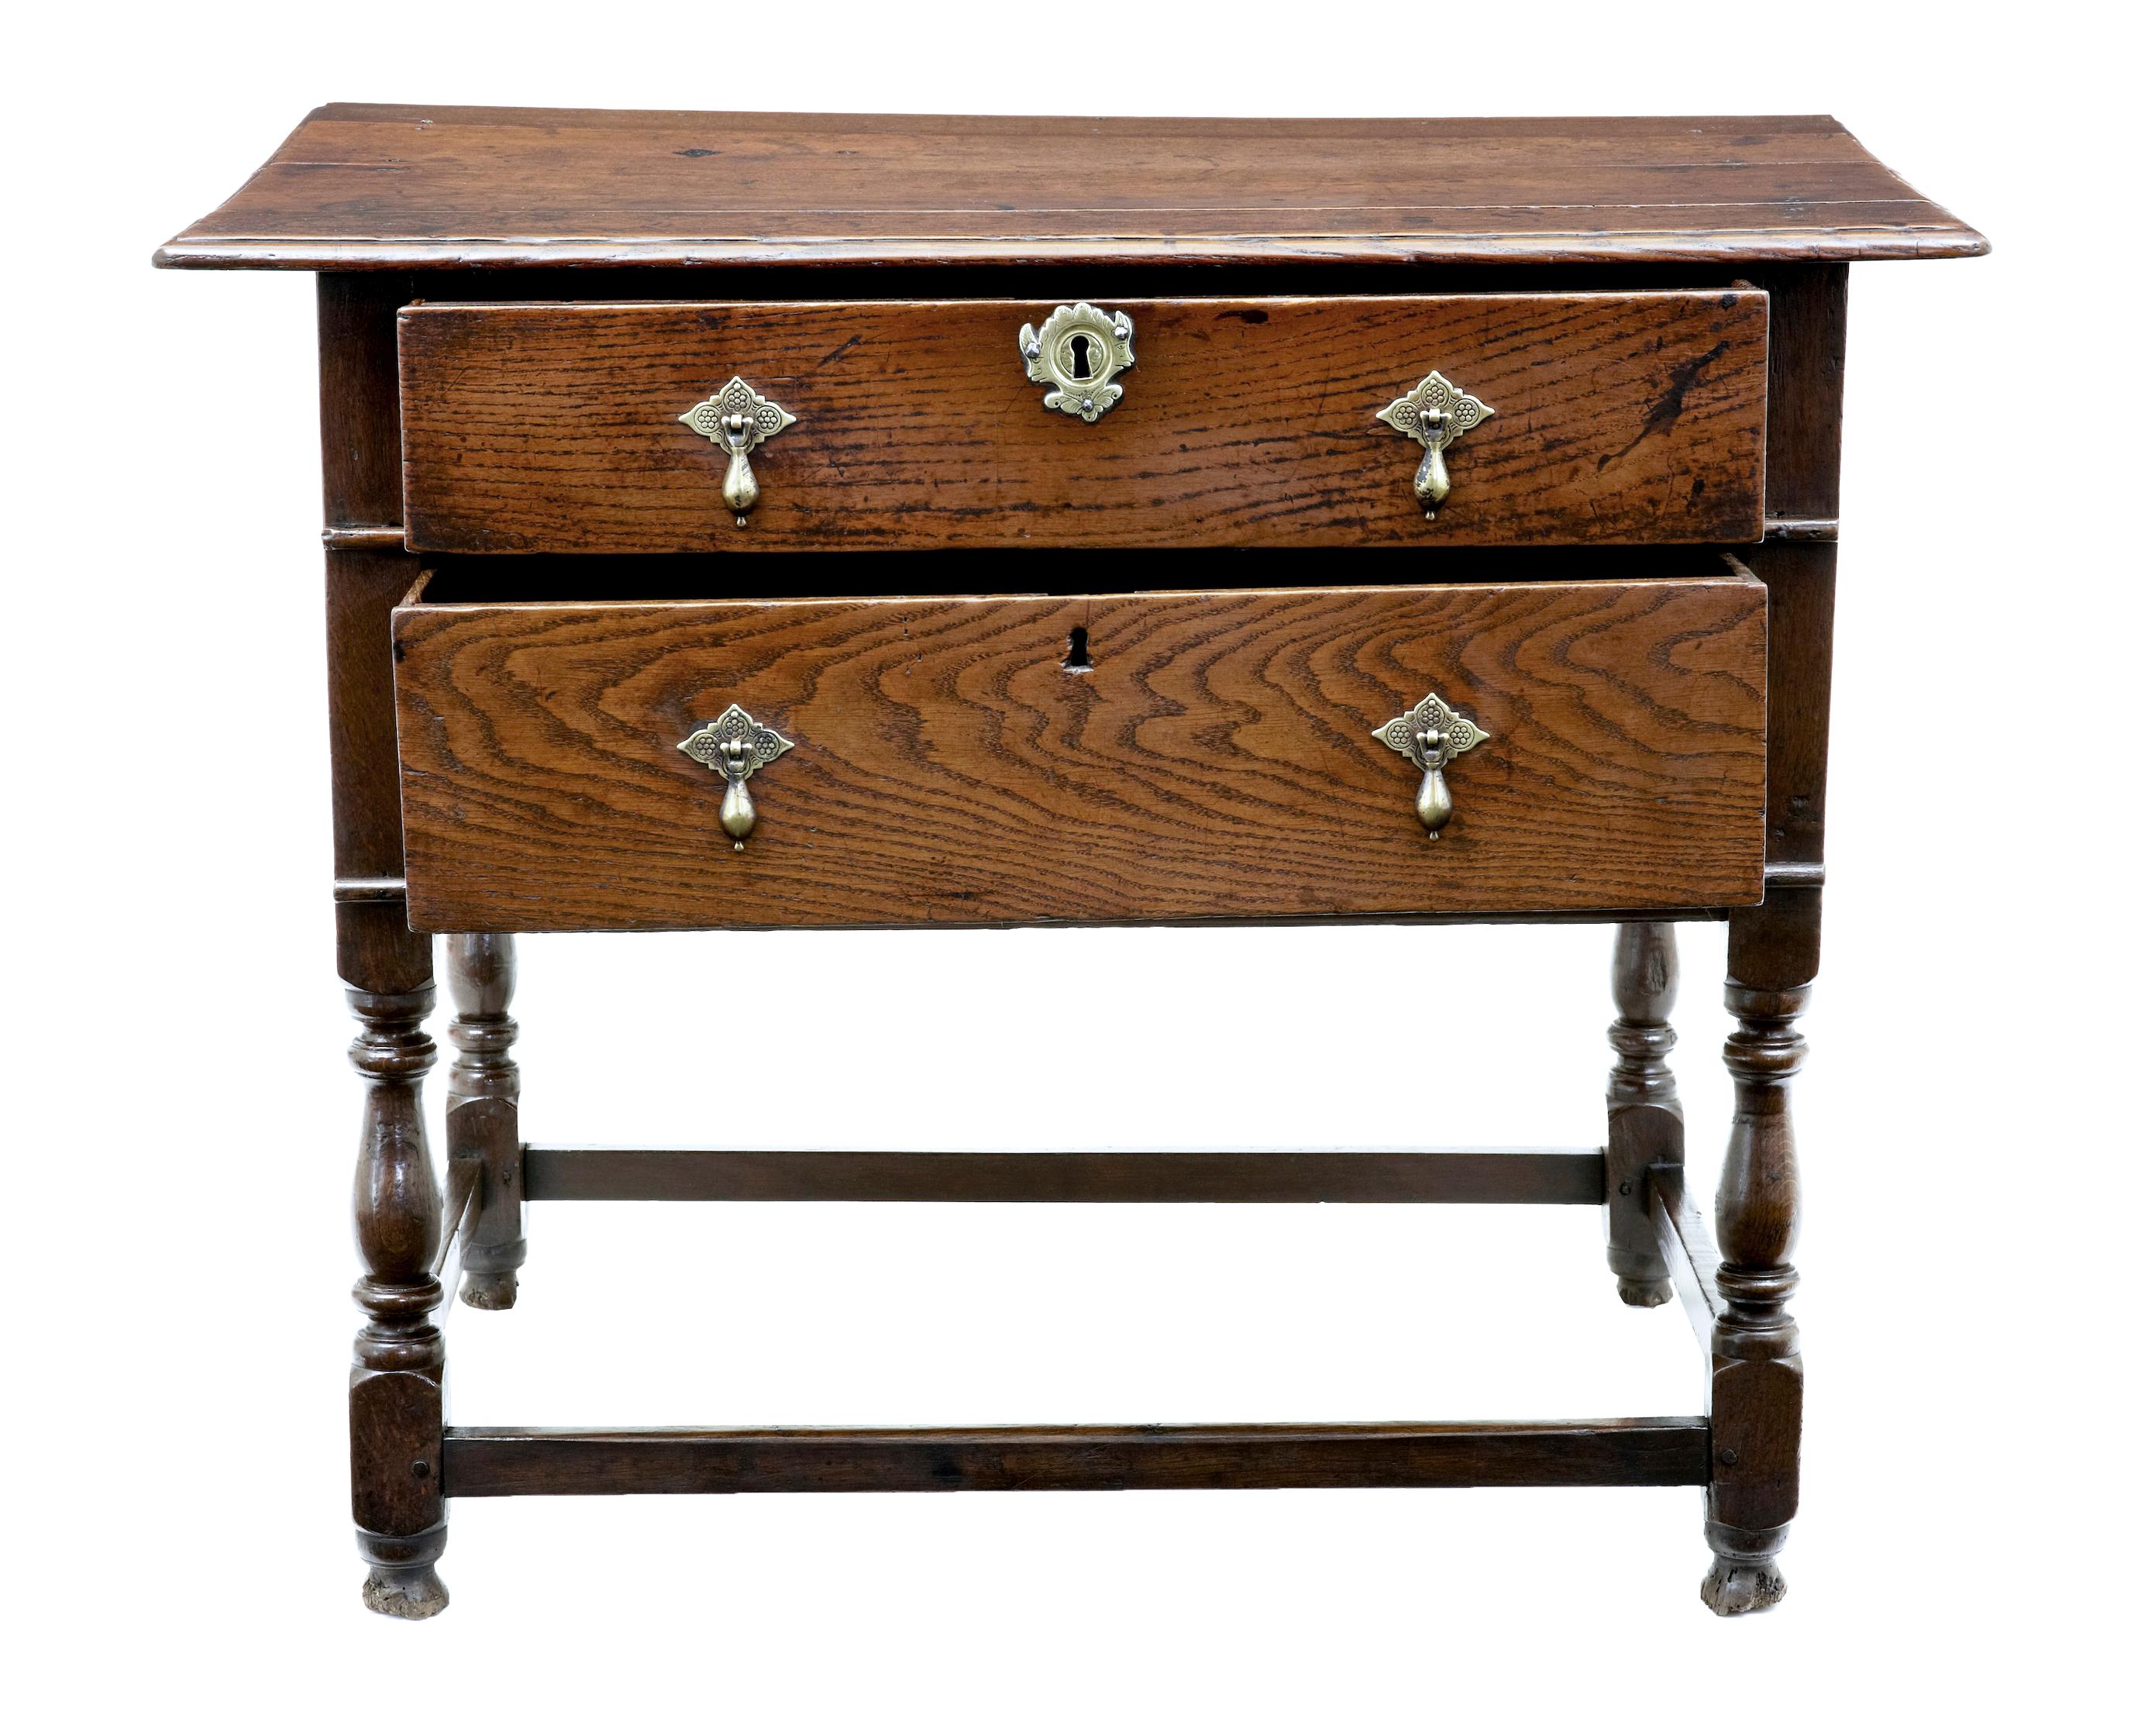 Very rare early 18th century two drawer oak side table, circa 1730.

Over-sailing 4 plank oak top, with 2 deep drawers below, fitted with ornate brass droplet handles and escutheons. Standing on 4 turned legs united by stretcher.

Great color